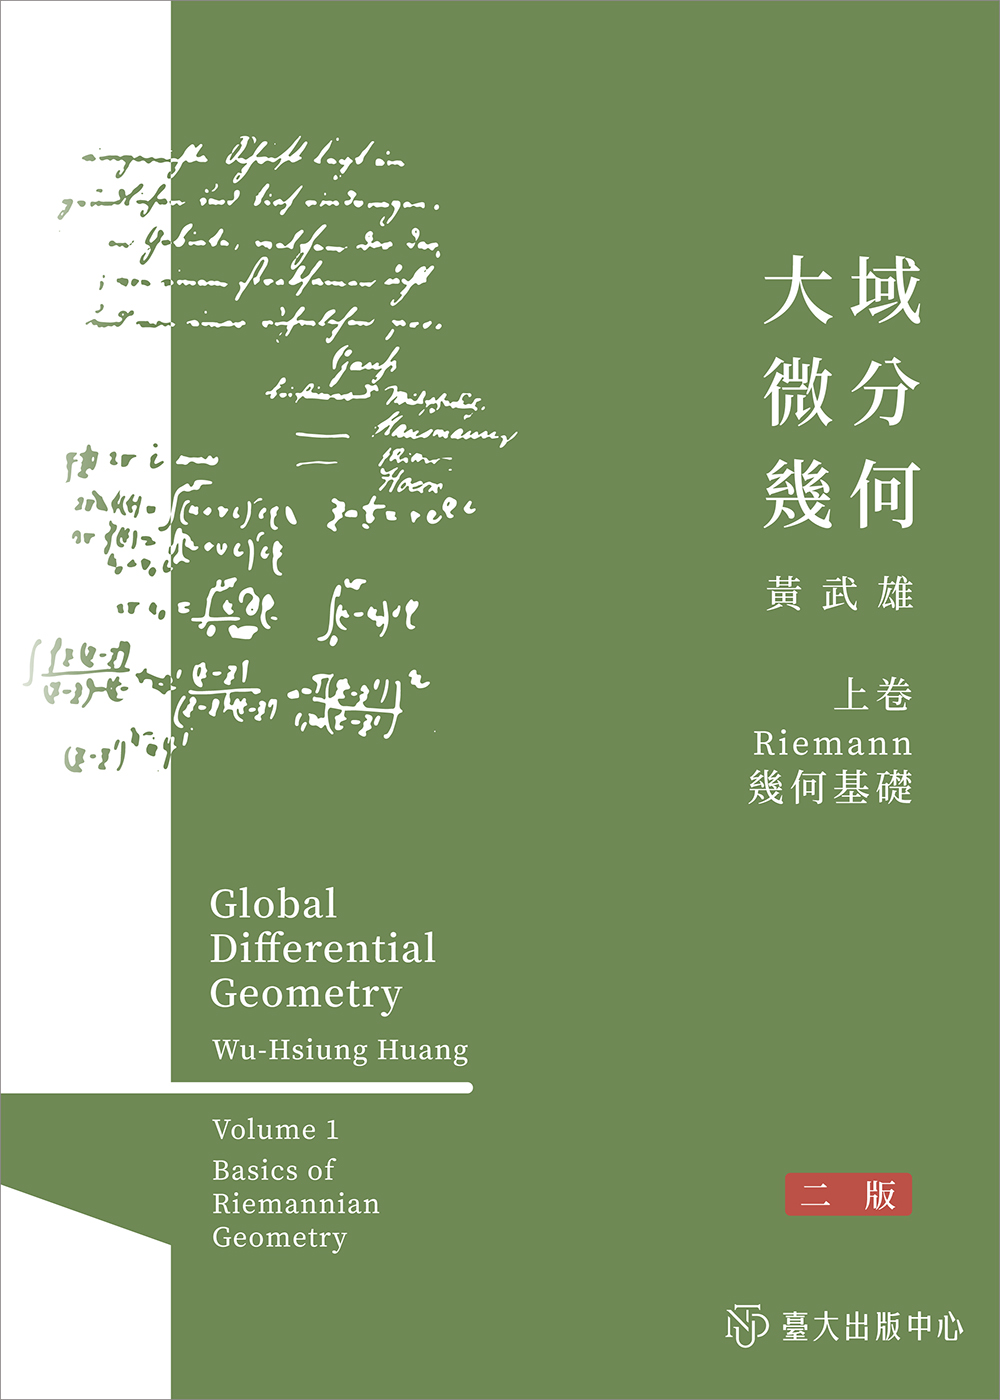 Global Differential Geometry Vol 1: Basic of Riemannnian Geometry  (2nd edition)